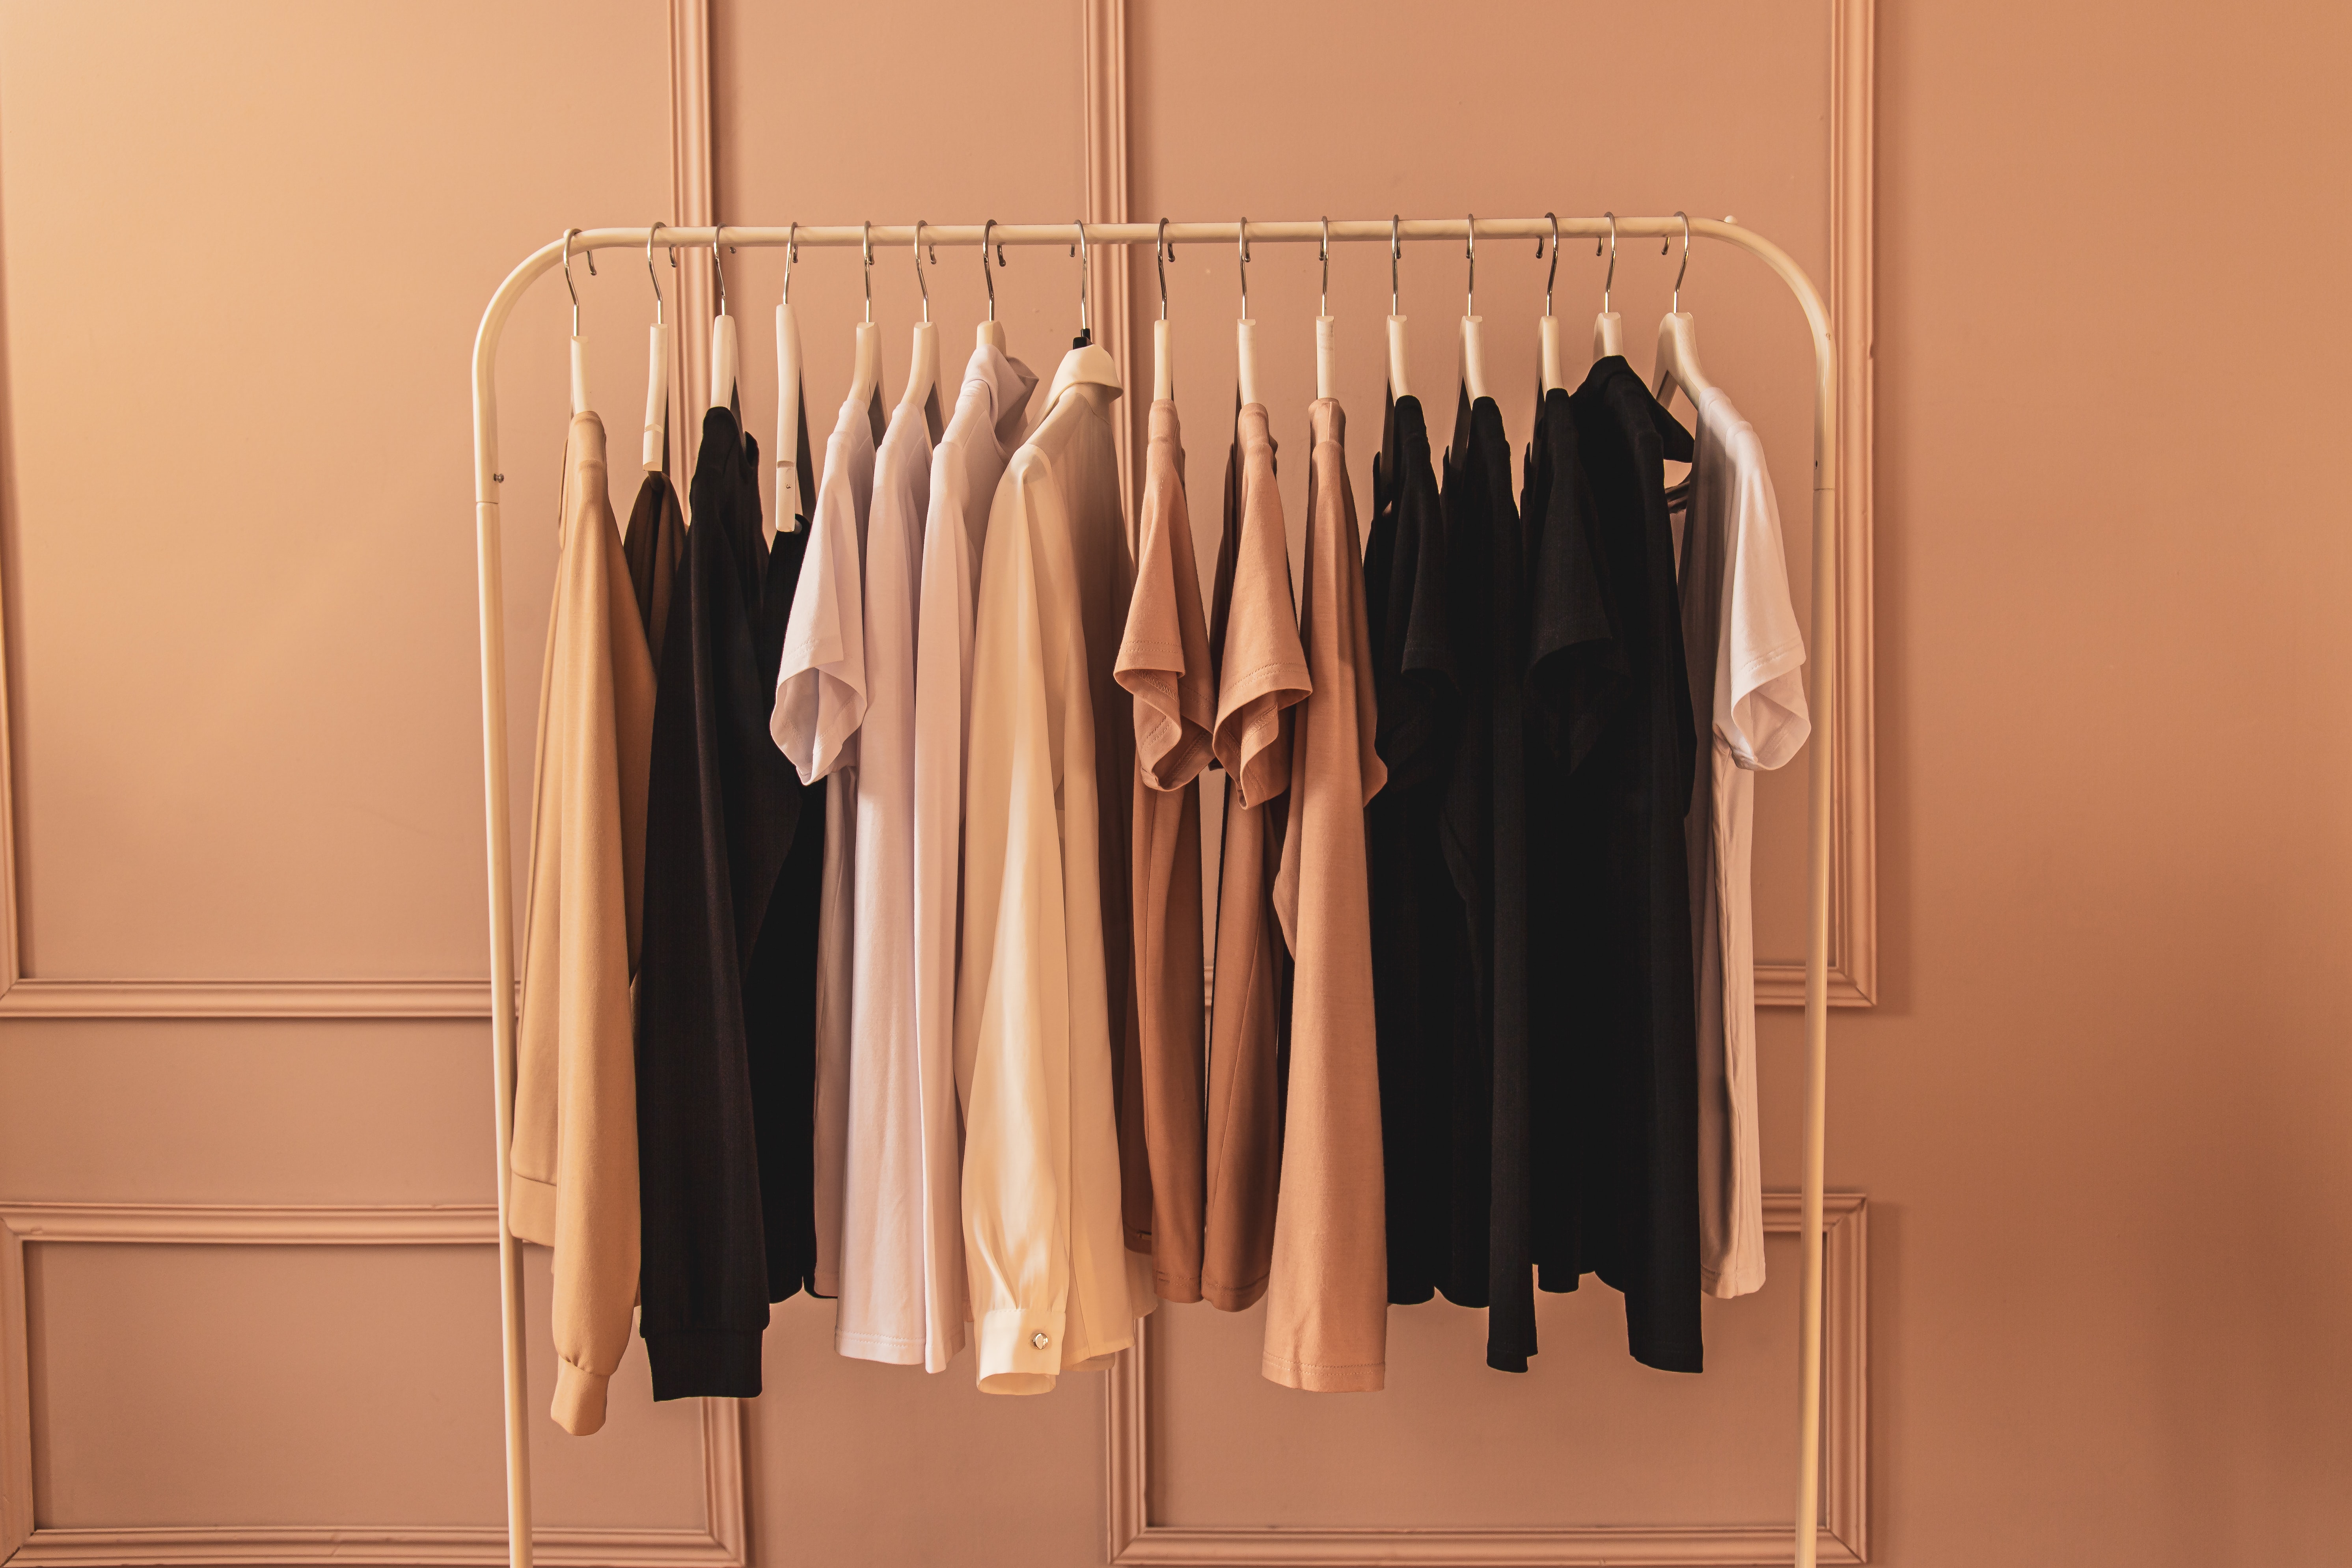 clothing rack of beige and black clothes against a beige, paneled wall. 